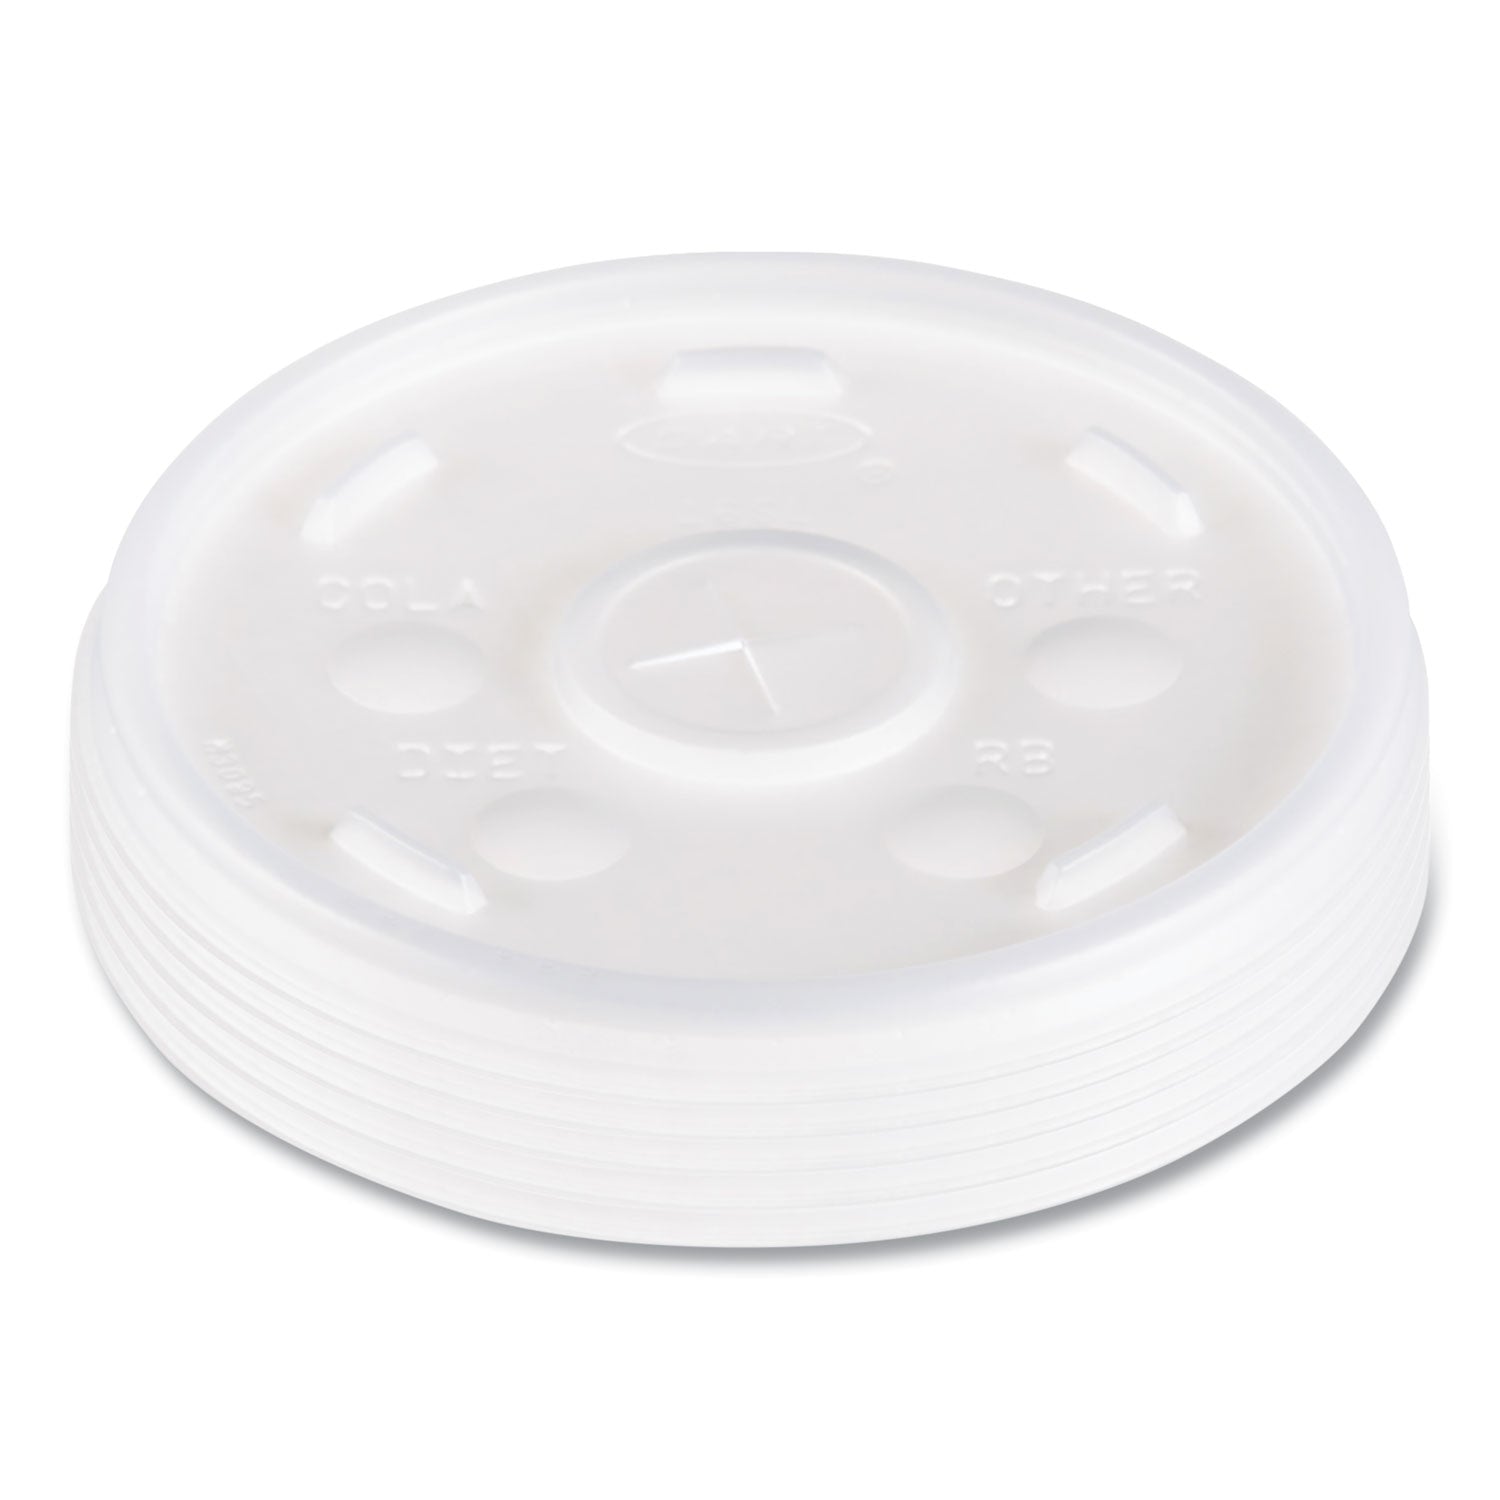 Plastic Lids, Fits 12 oz to 24 oz Hot/Cold Foam Cups, Straw-Slot Lid, White, 100/Pack, 10 Packs/Carton - 